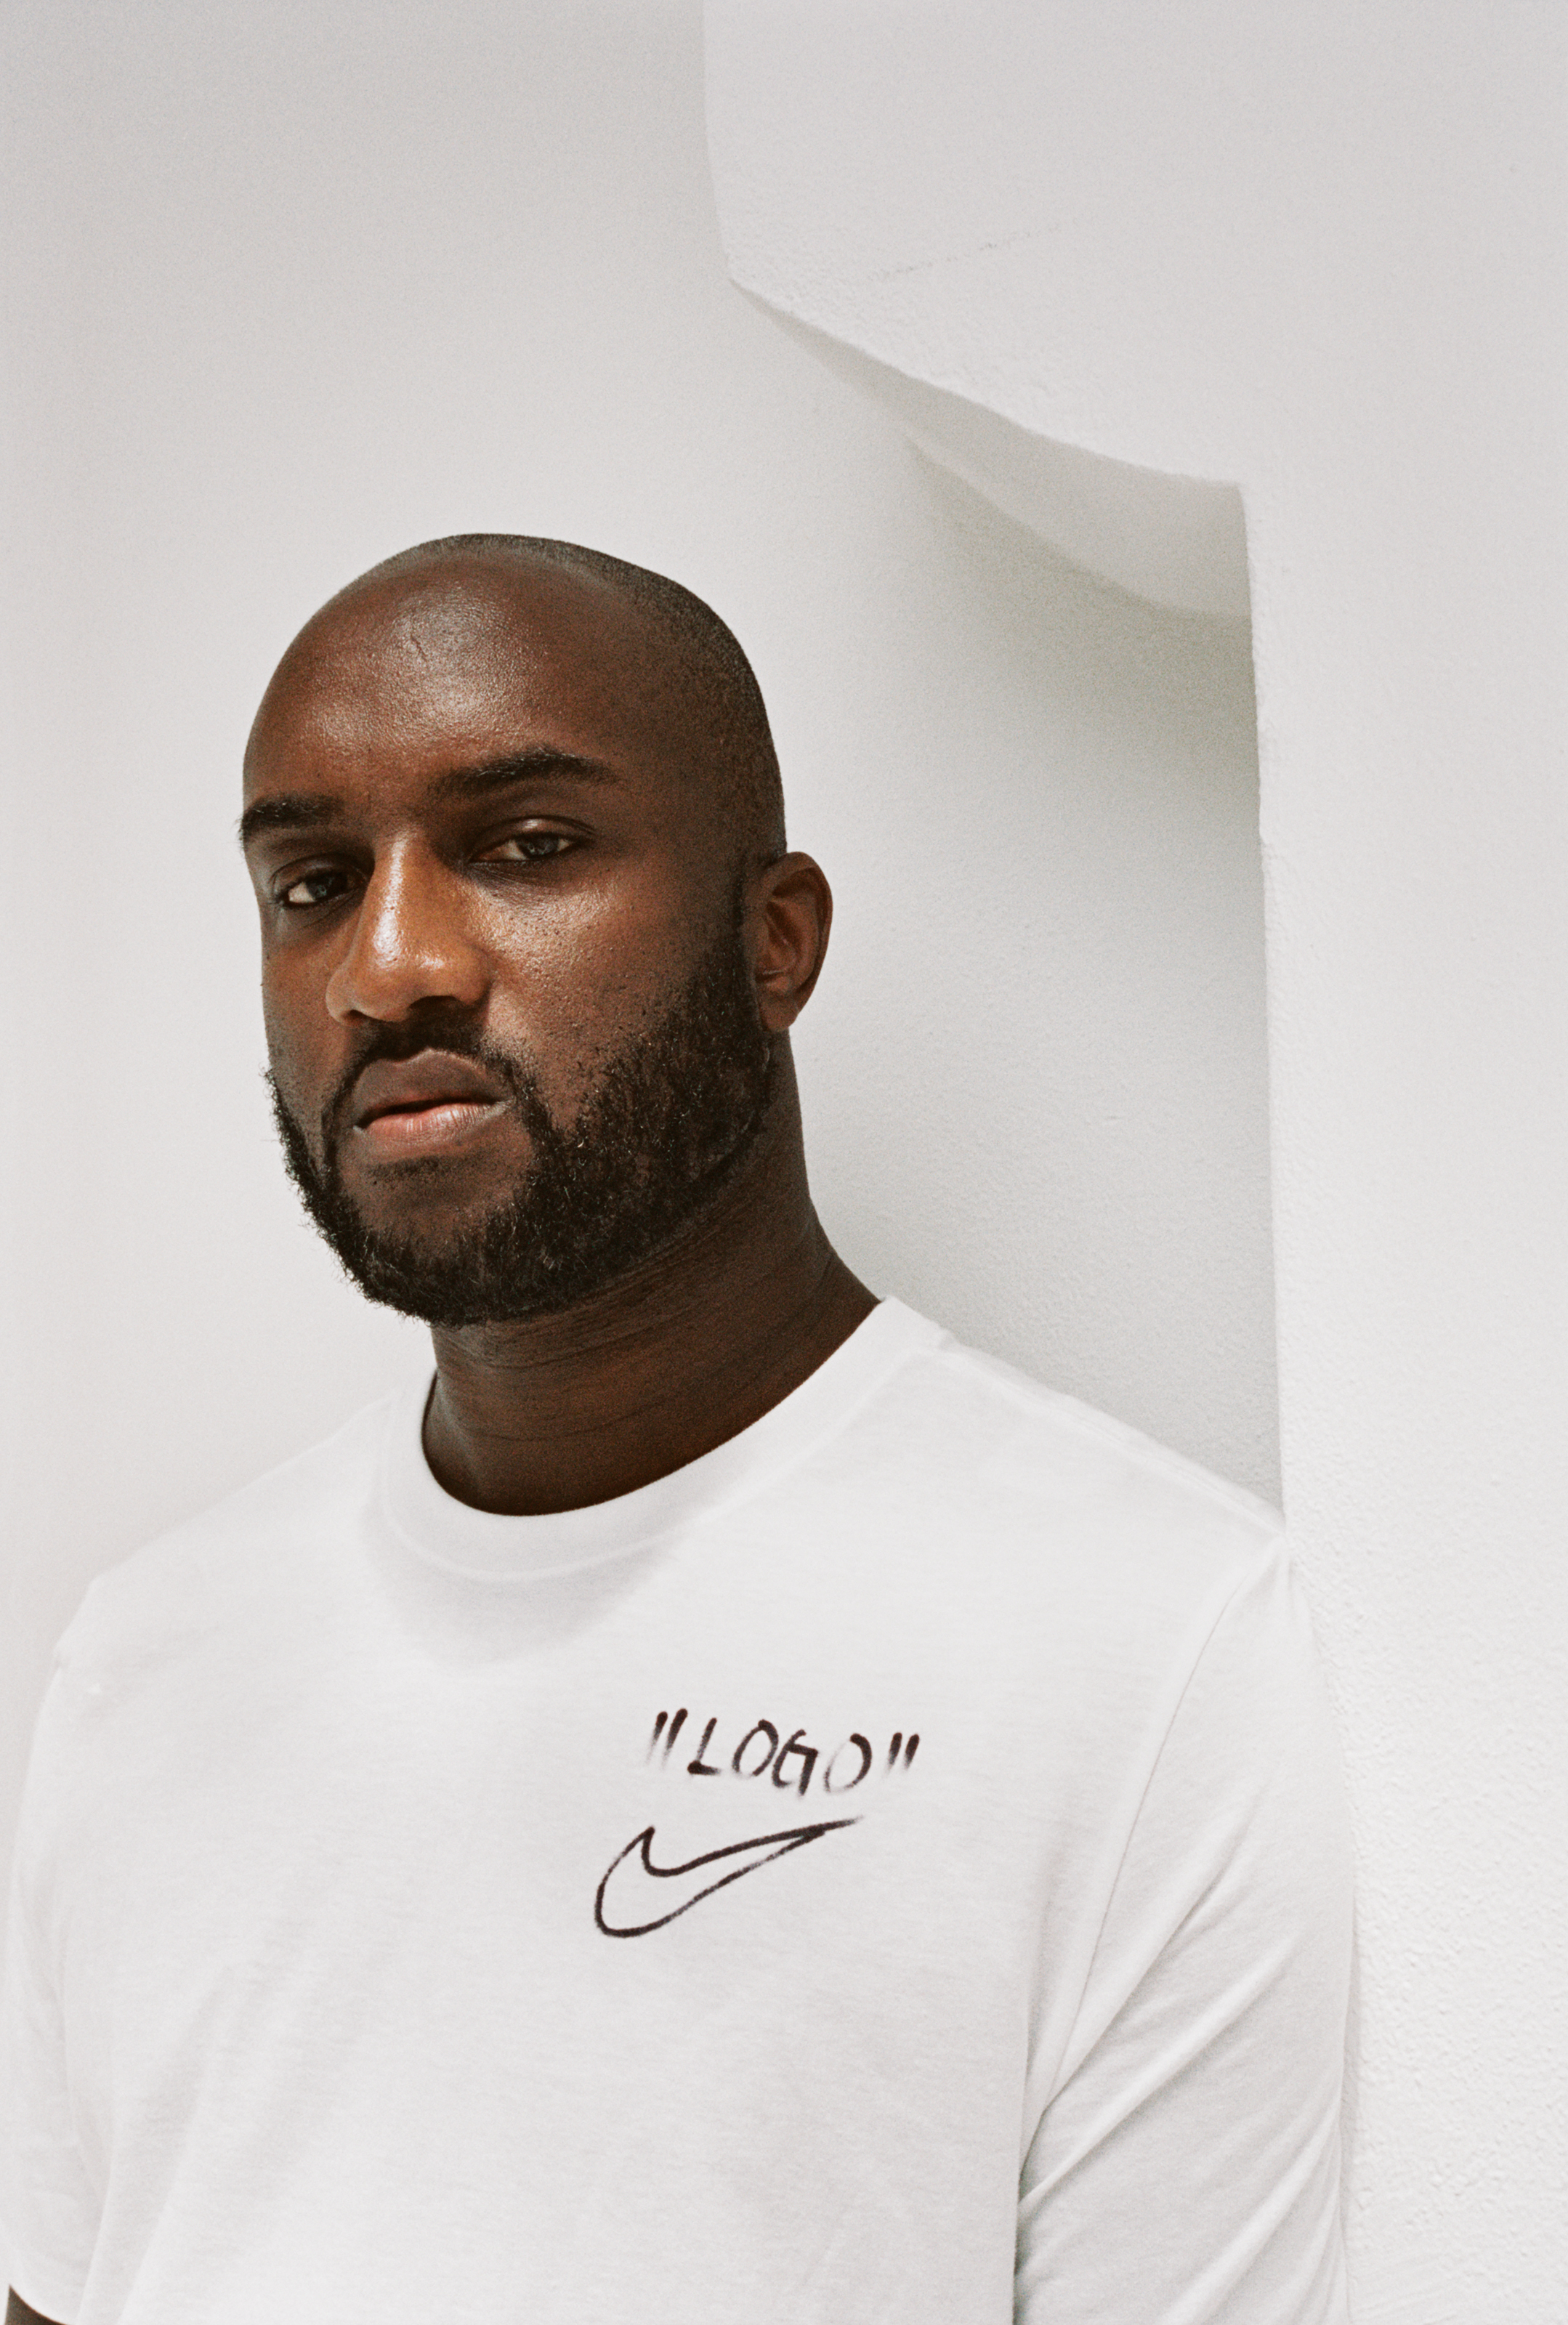 A tribute to the most iconic album covers made by the late Virgil Abloh